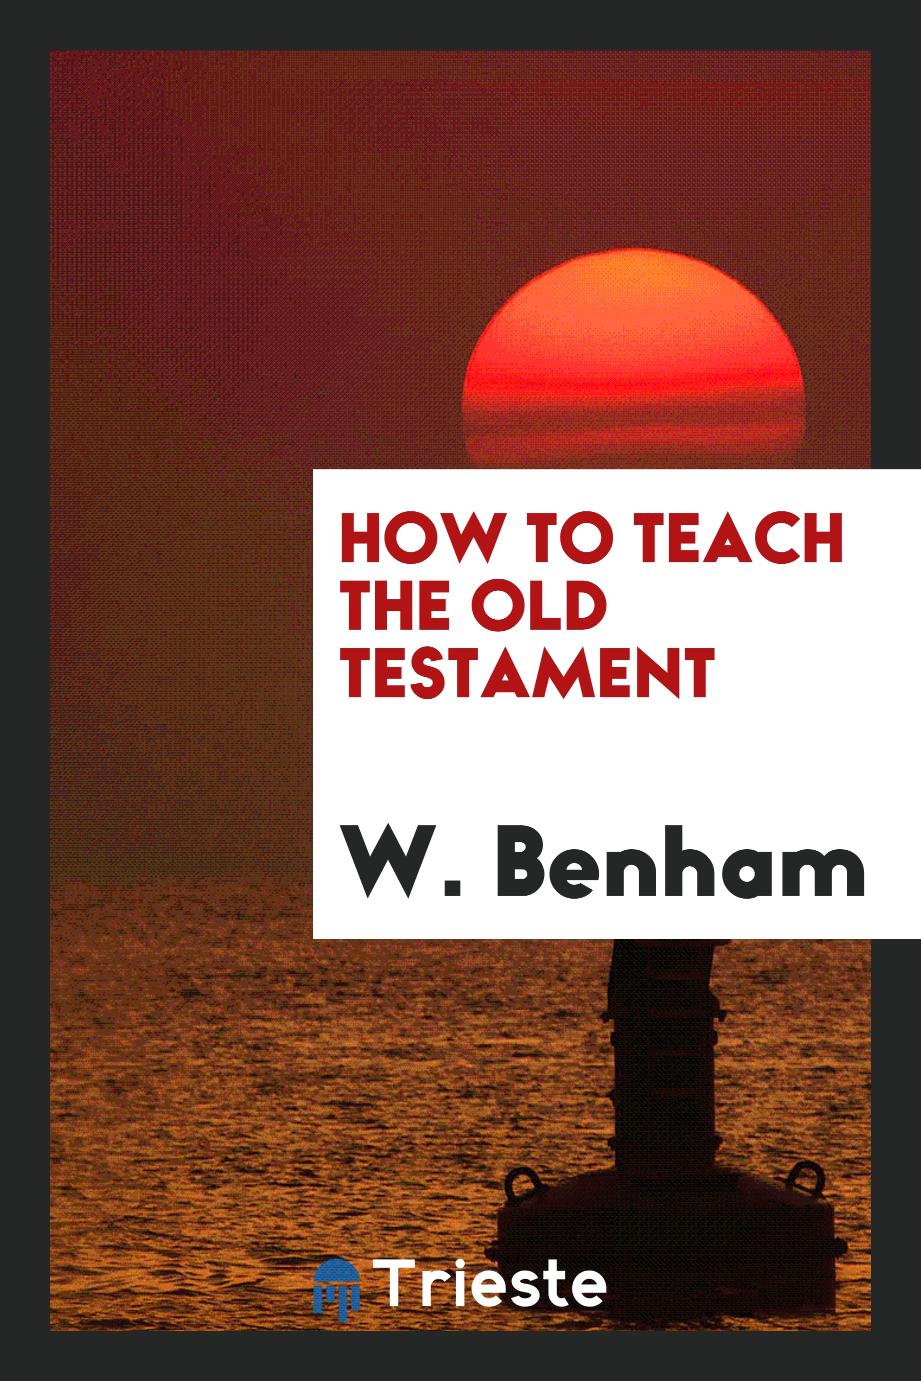 How to teach the Old Testament